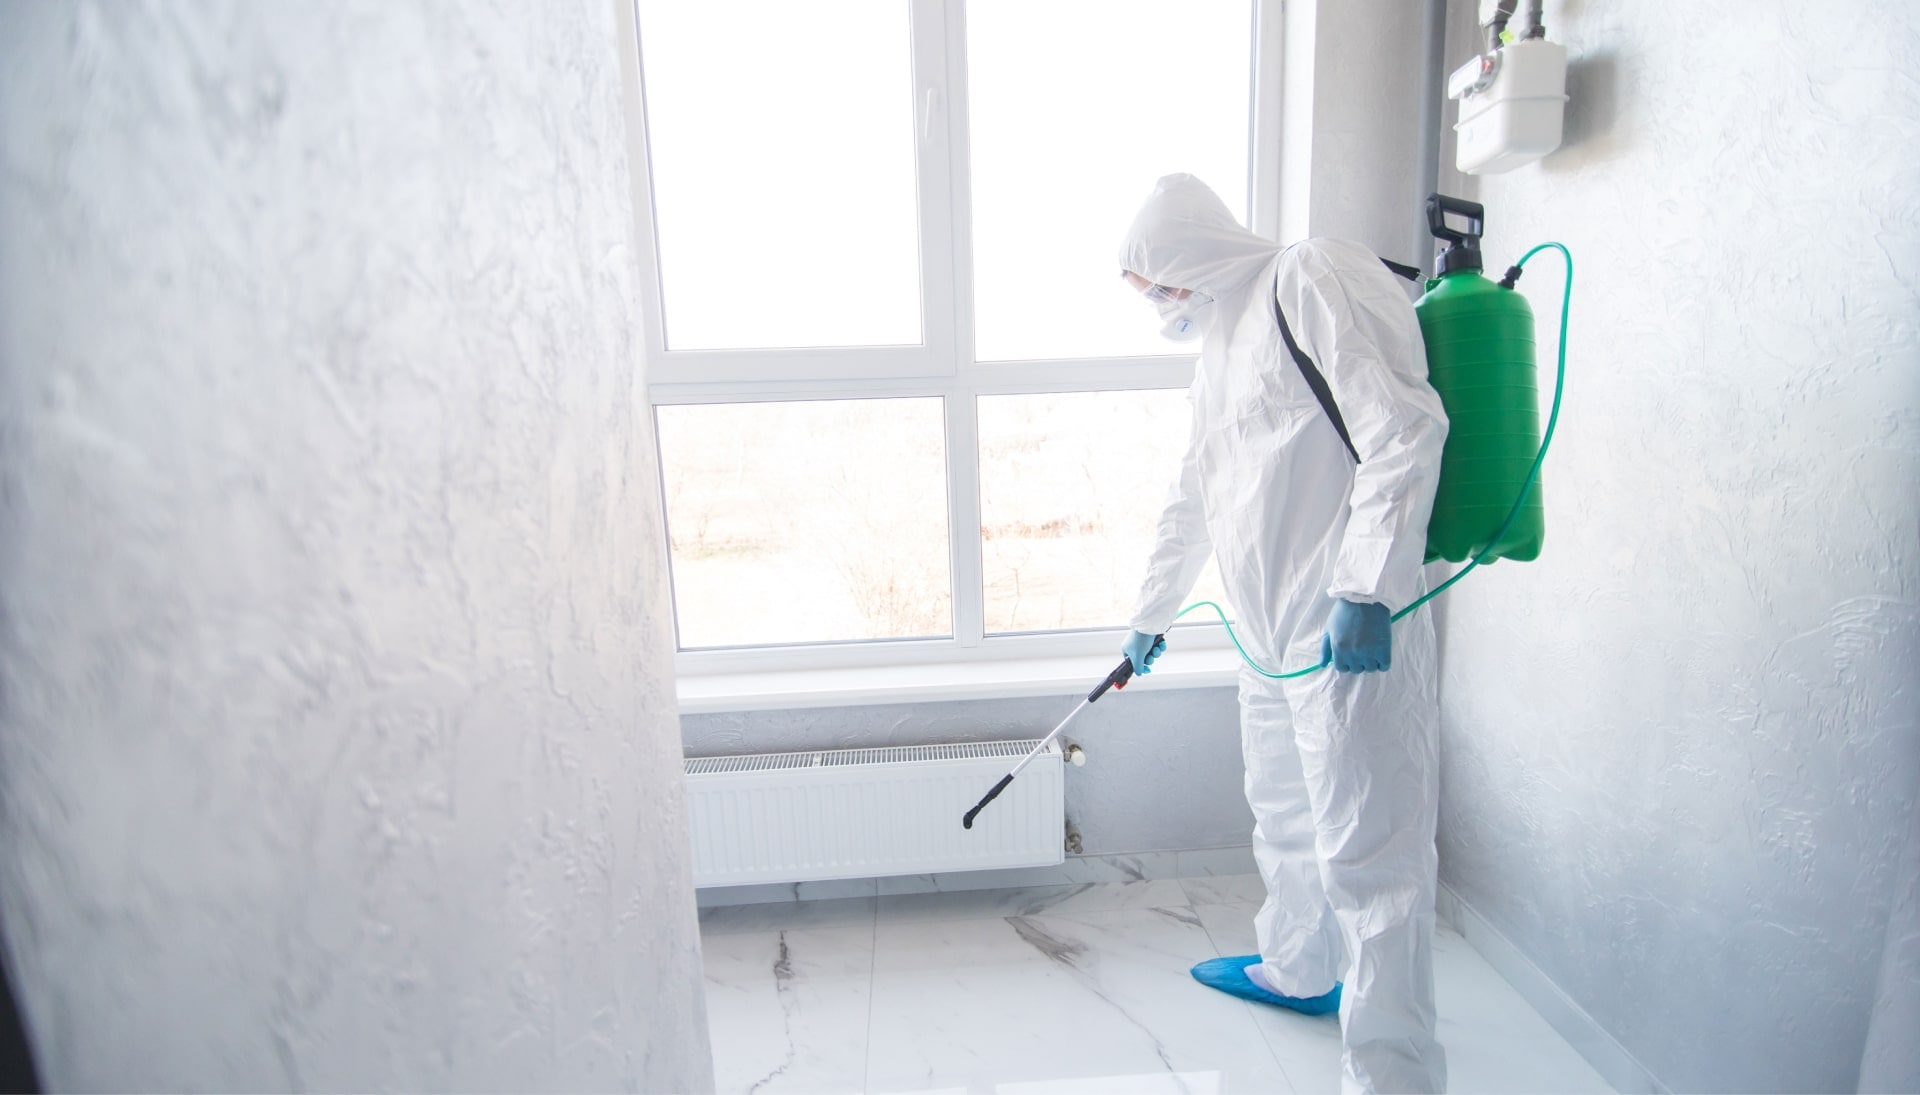 We provide the highest-quality mold inspection, testing, and removal services in the Chesapeake, Virginia area.